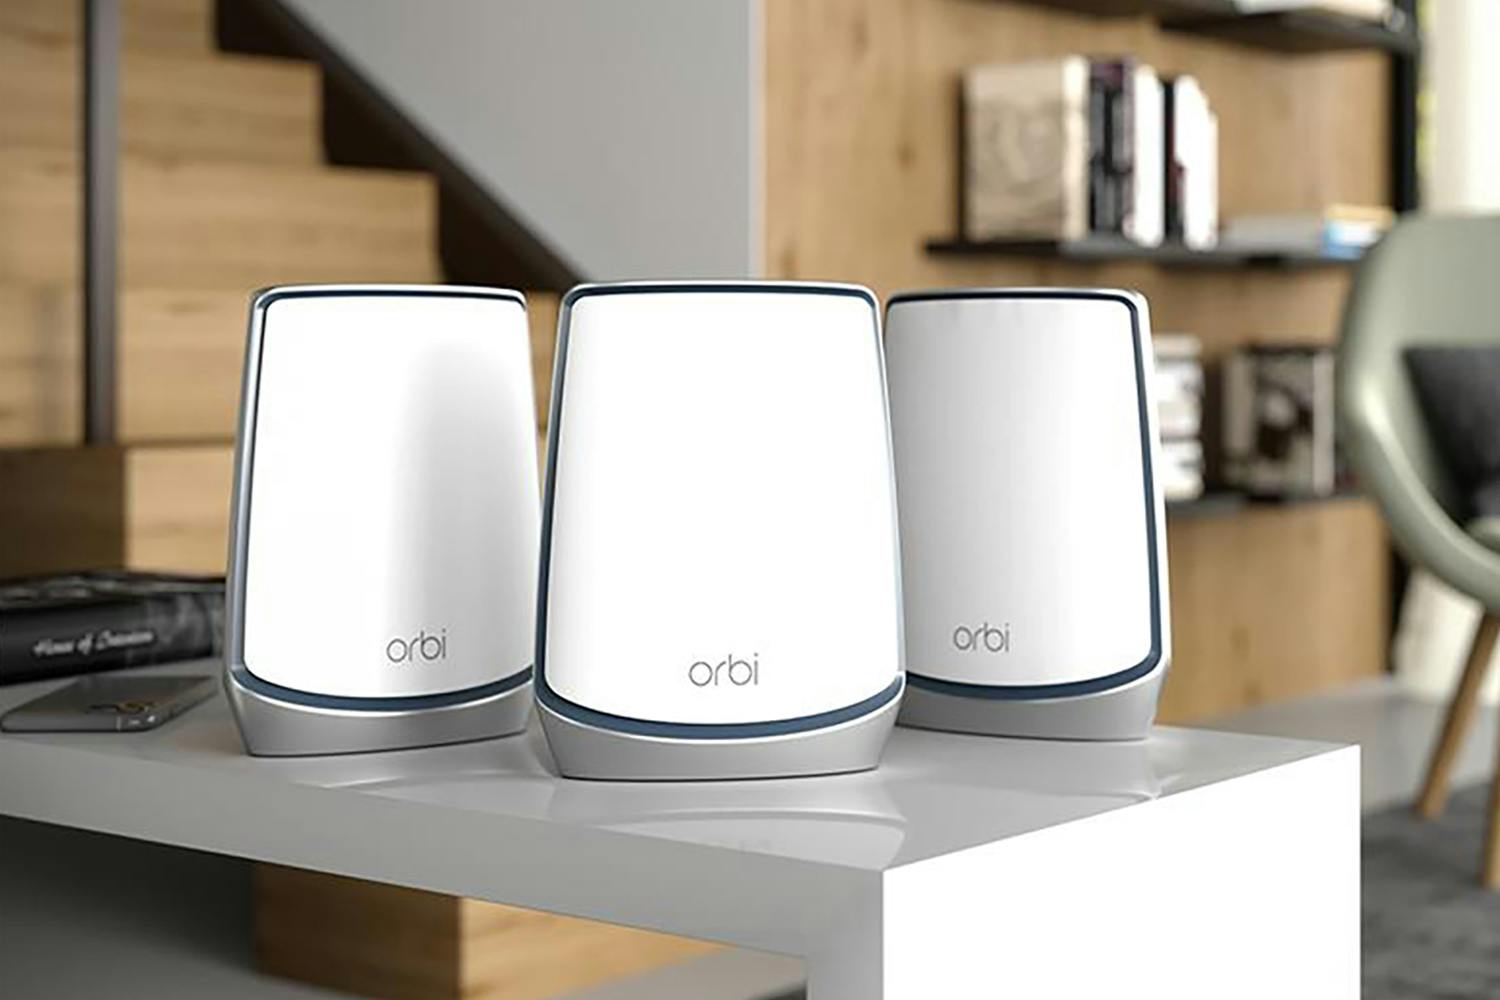 NETGEAR Orbi Whole Home Tri-band Mesh Wi-Fi 6 System (RBK853) – Router with 2 Satellite Extenders